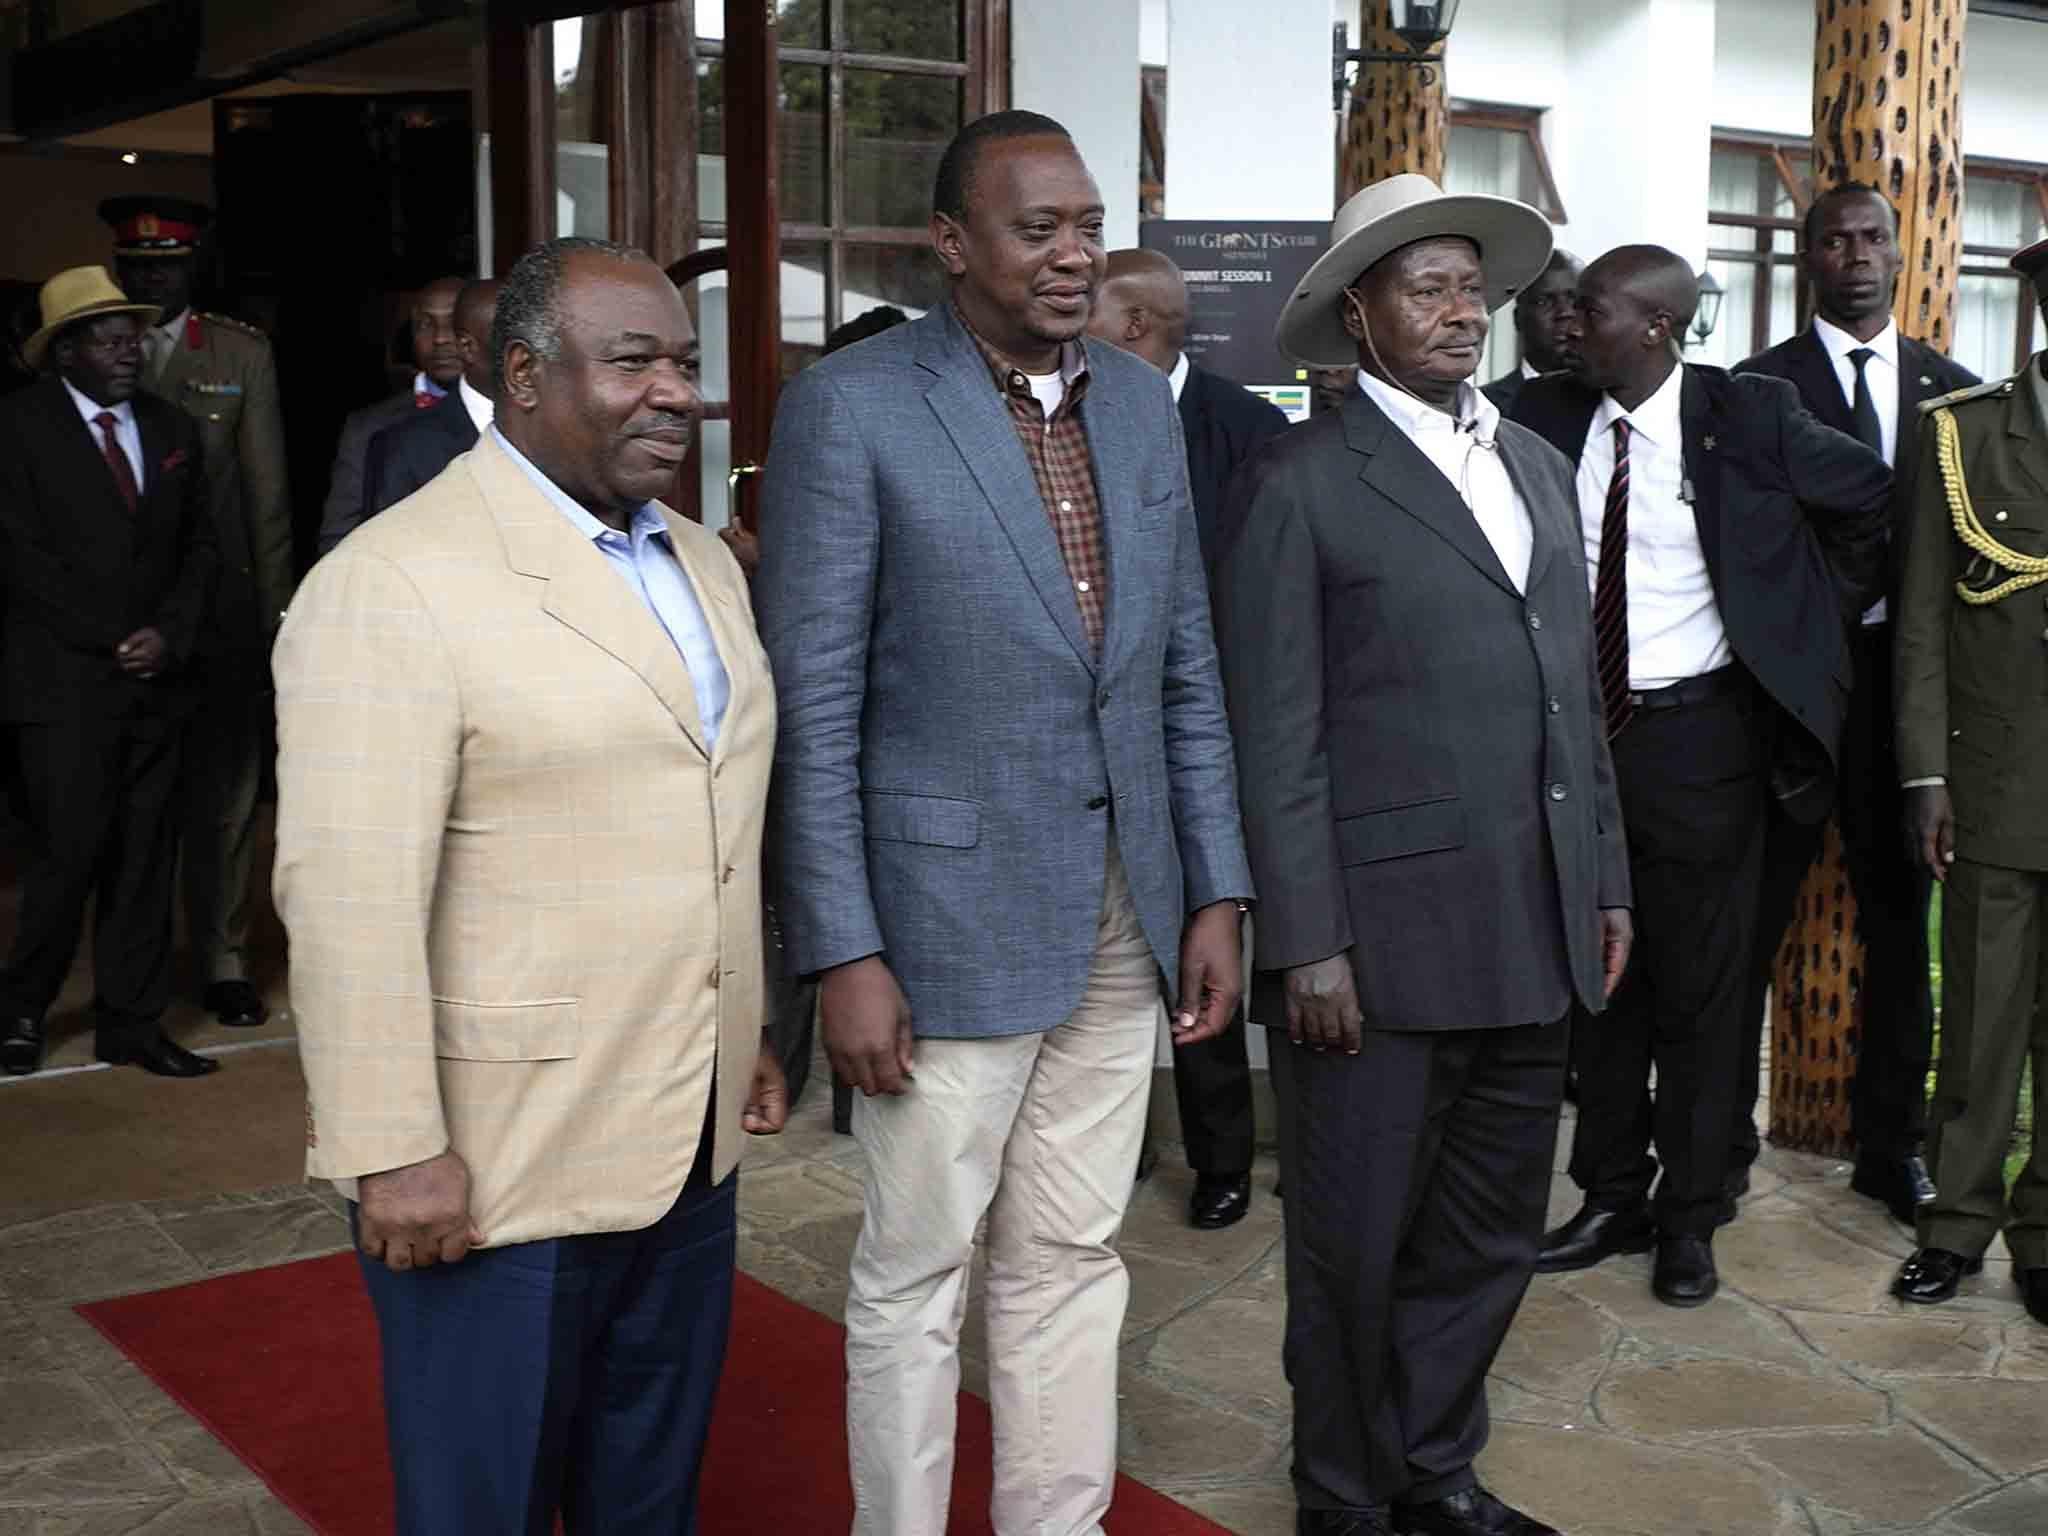 The presidents of Gabon, Kenya and Uganda (left to right) were among those attending. The Summit also had high-level diplomatic missions from Botswana, Ethiopia and Tanzania present. The US Deputy Secretary of State arrived and read out a message of support from President Obama.